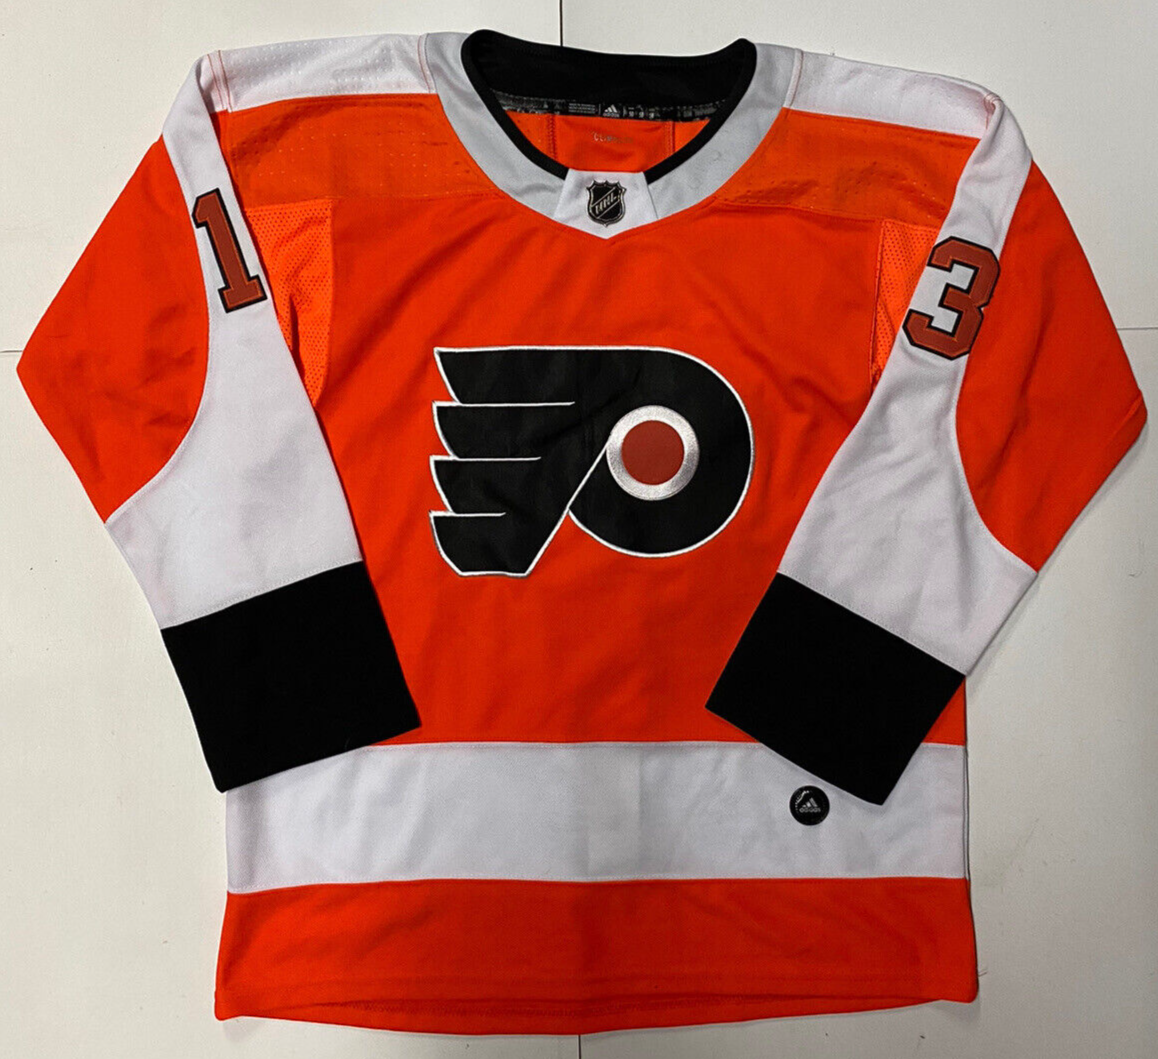 Philadelphia Flyers - Fit for a beauty. 🟠⚫️⚪️ Get your #ReverseRetro  jersey